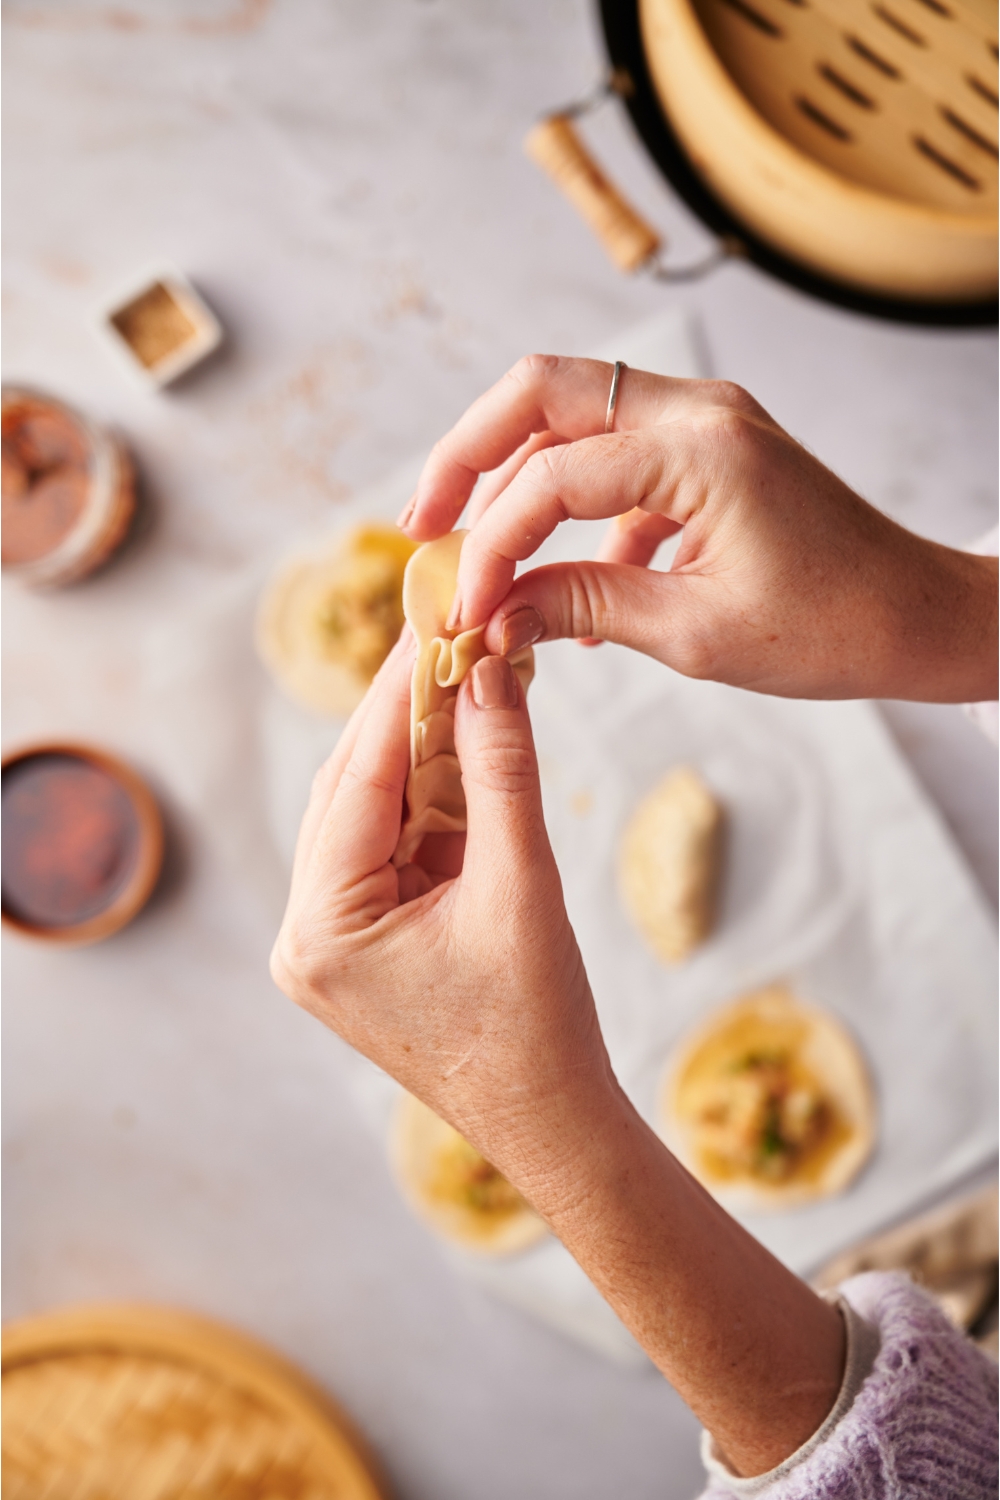 A hand pinching a dumpling to seal it. Below are more open-faced dumplings ready to be sealed.